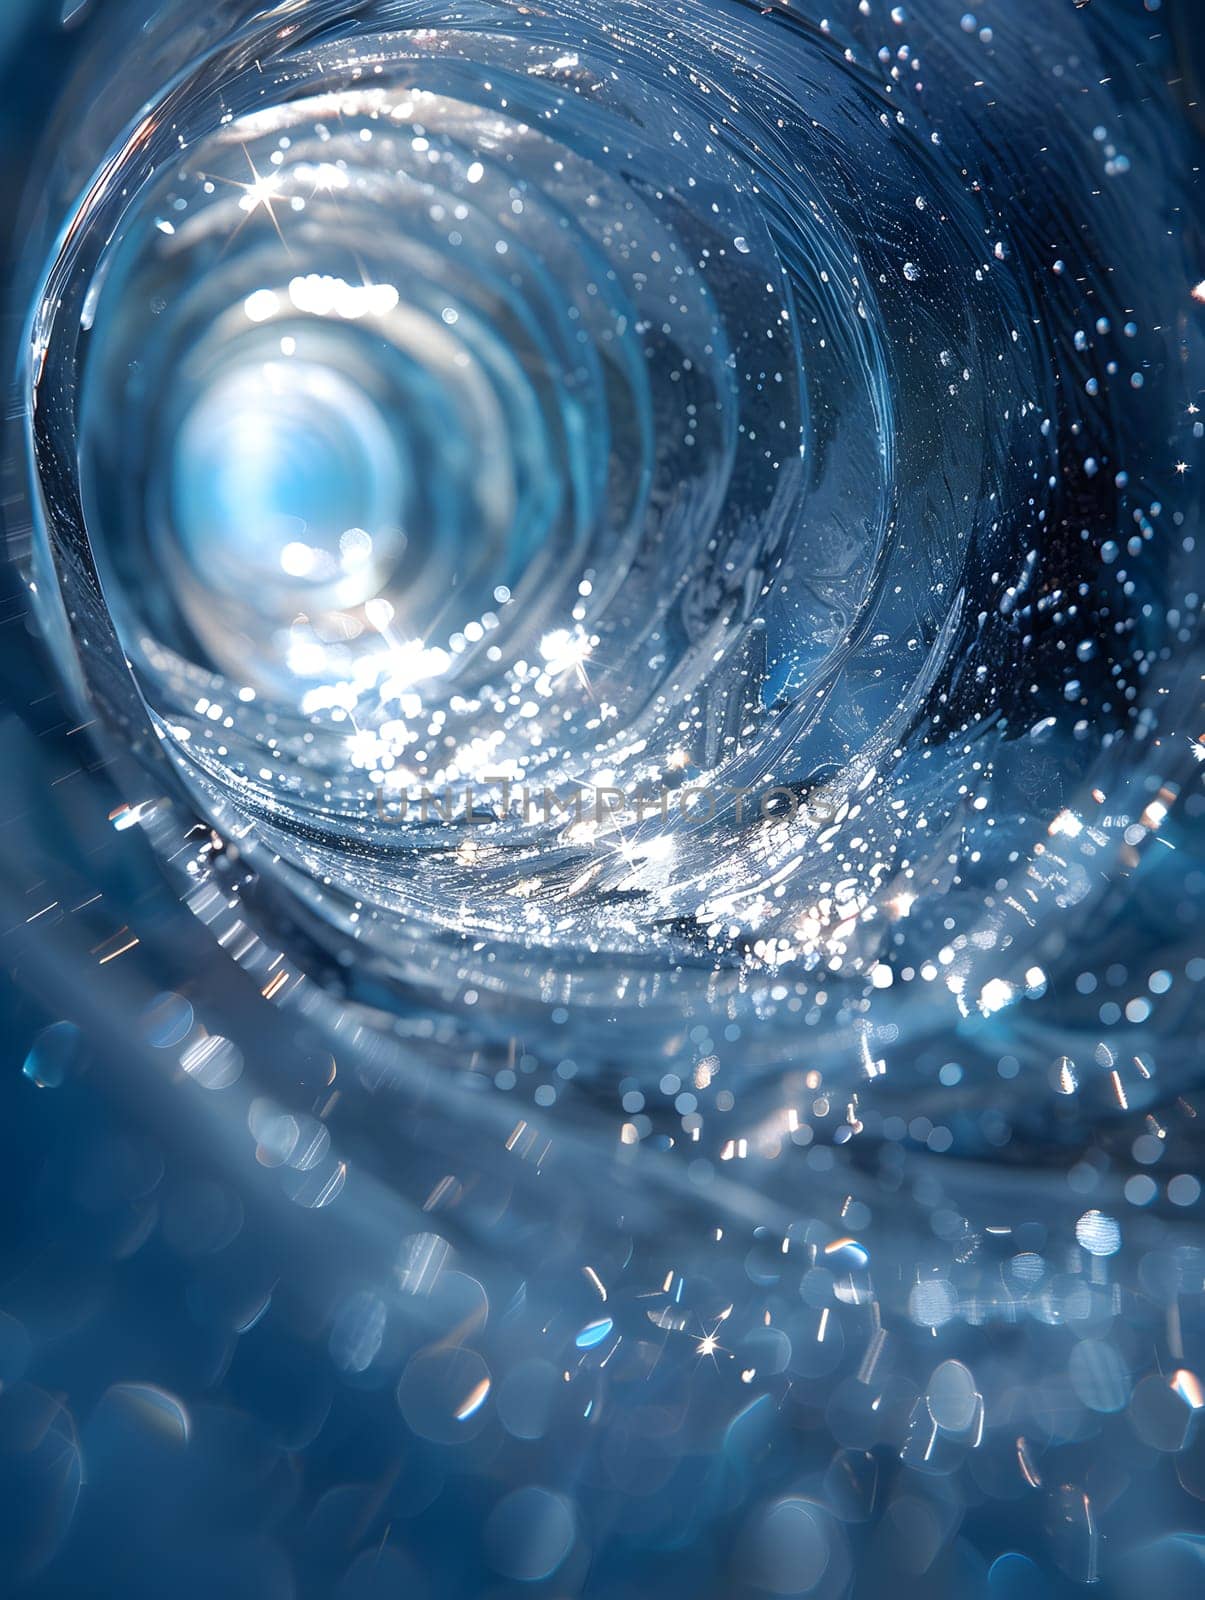 A closeup of a wind wave in the ocean, showing the fluid movement of water resources in an electric blue circle, under the vast sky